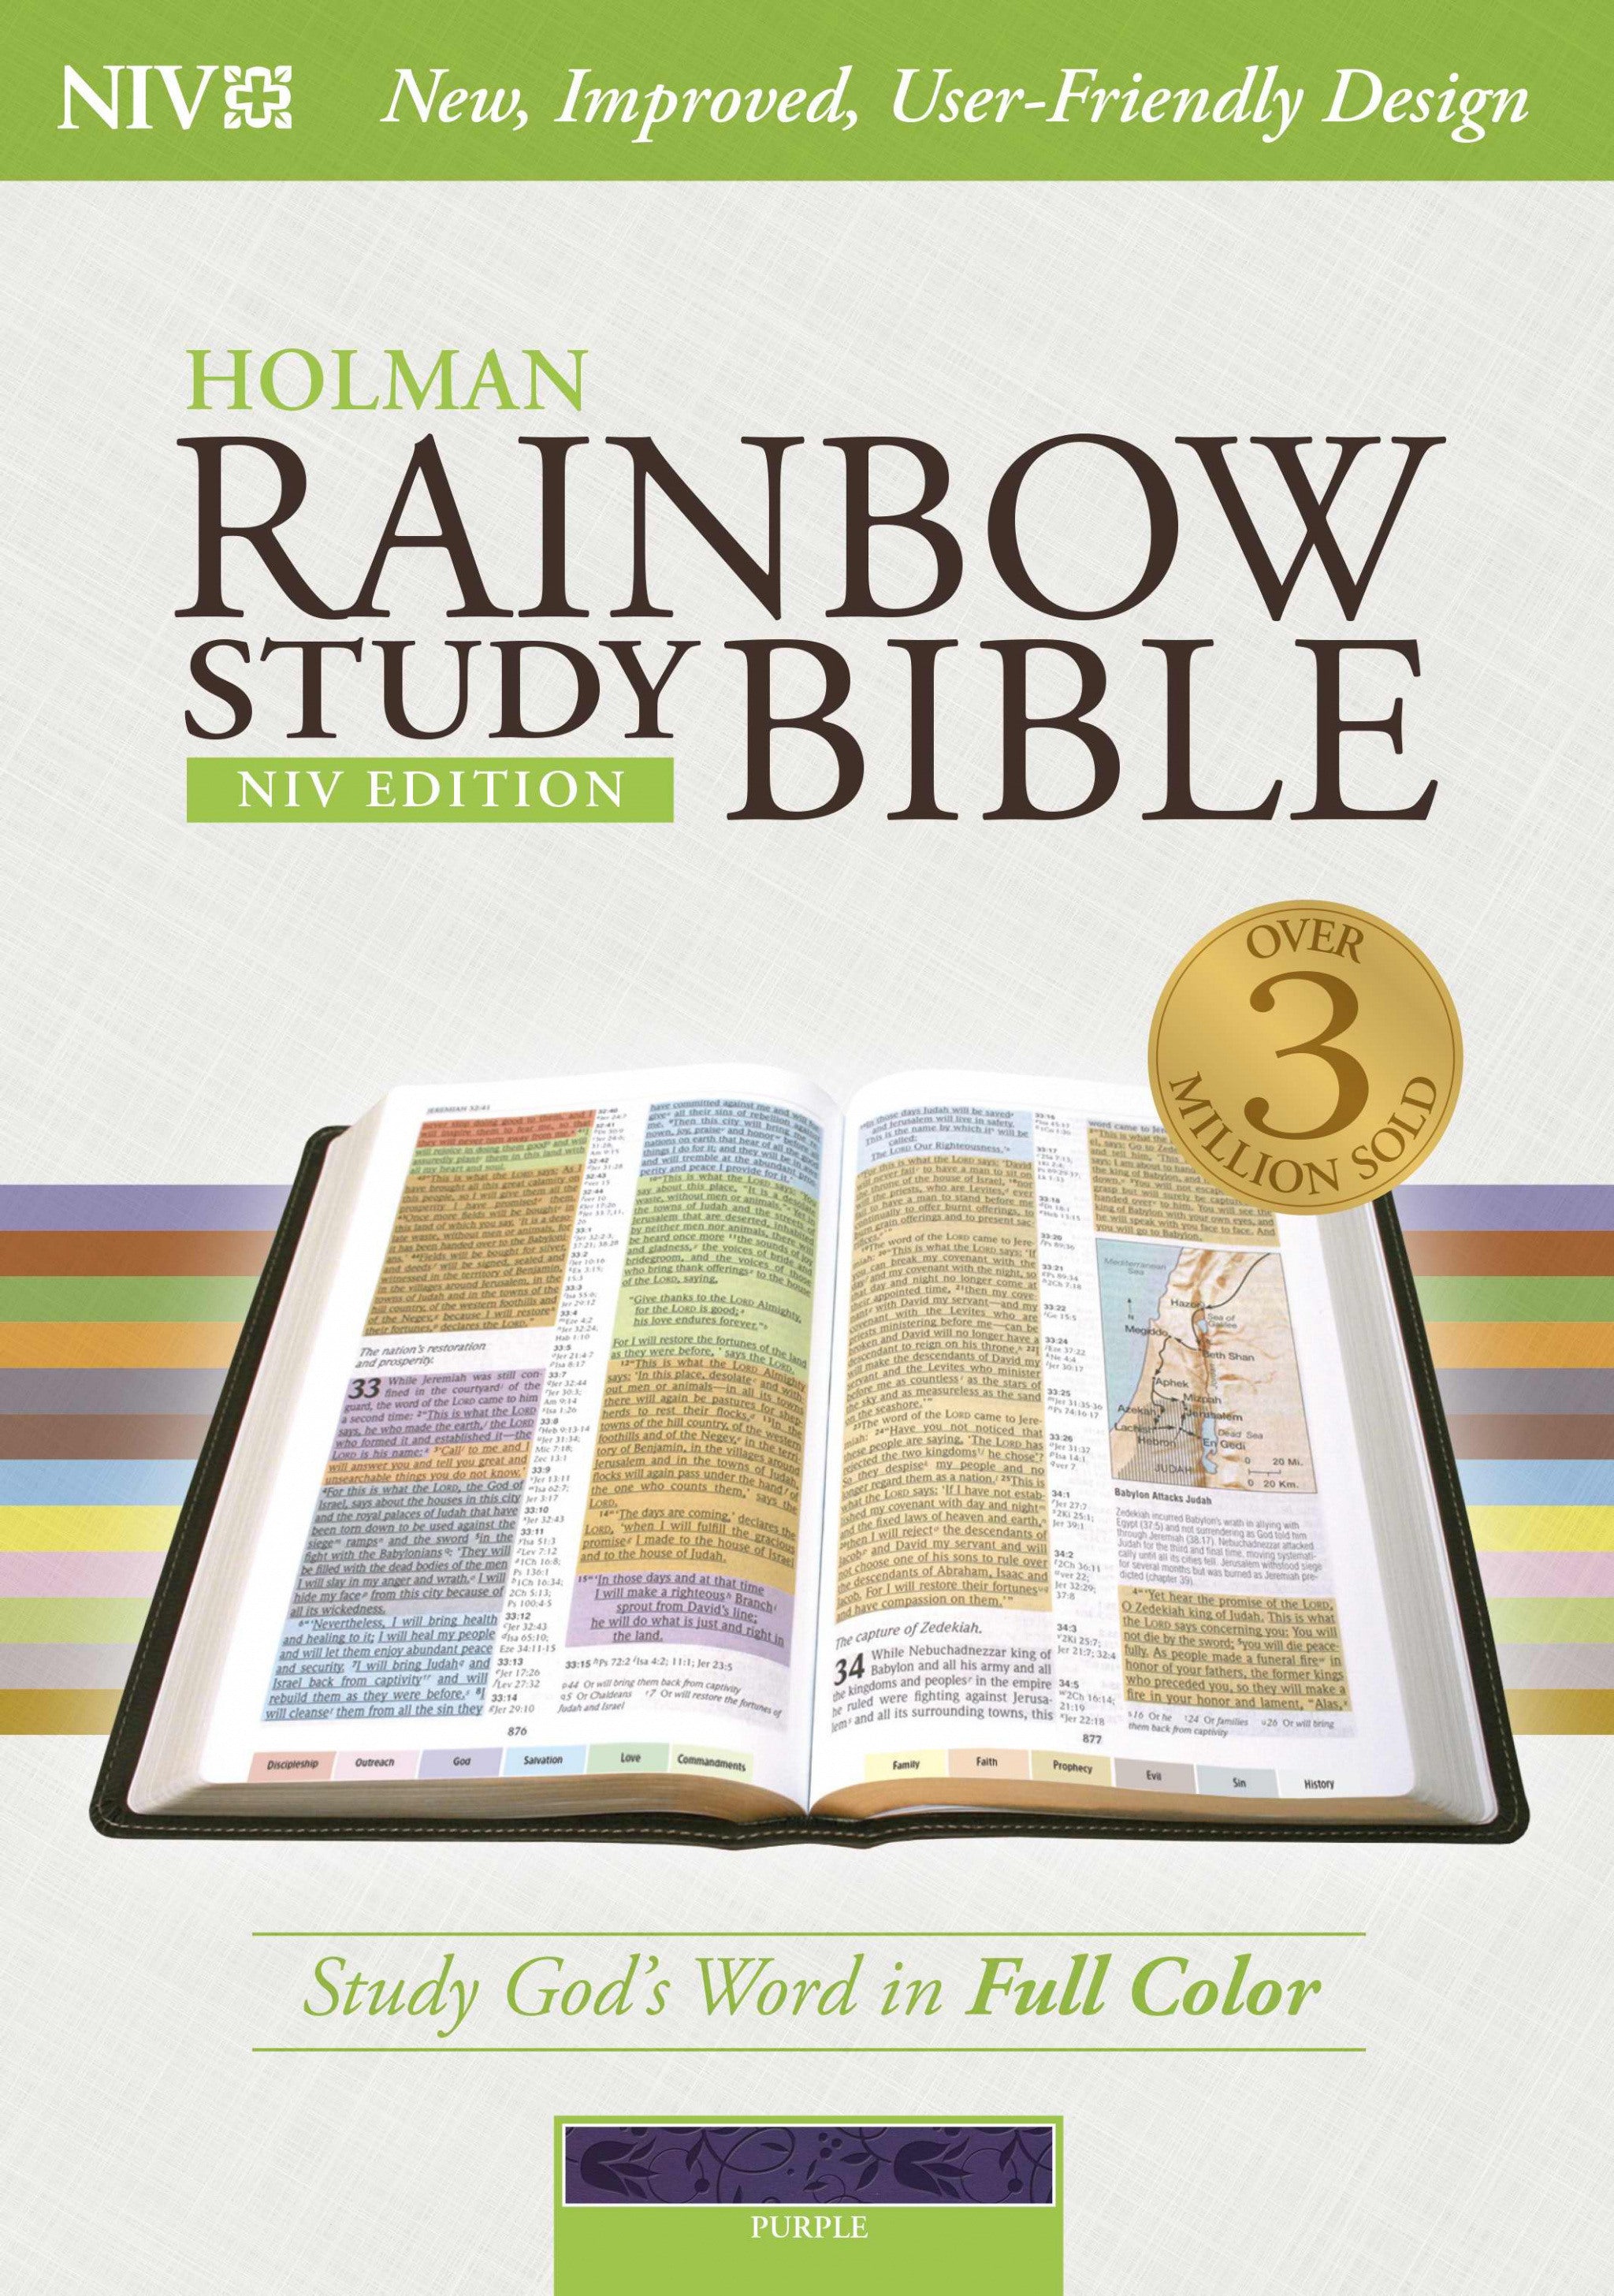 Image of NIV Rainbow Study Bible, Purple, Imitation Leather, Maps, Reading Calendar, Concordance, Subject Guide, Table of Weights and Measures, Ribbon Marker, Gilt Edges other